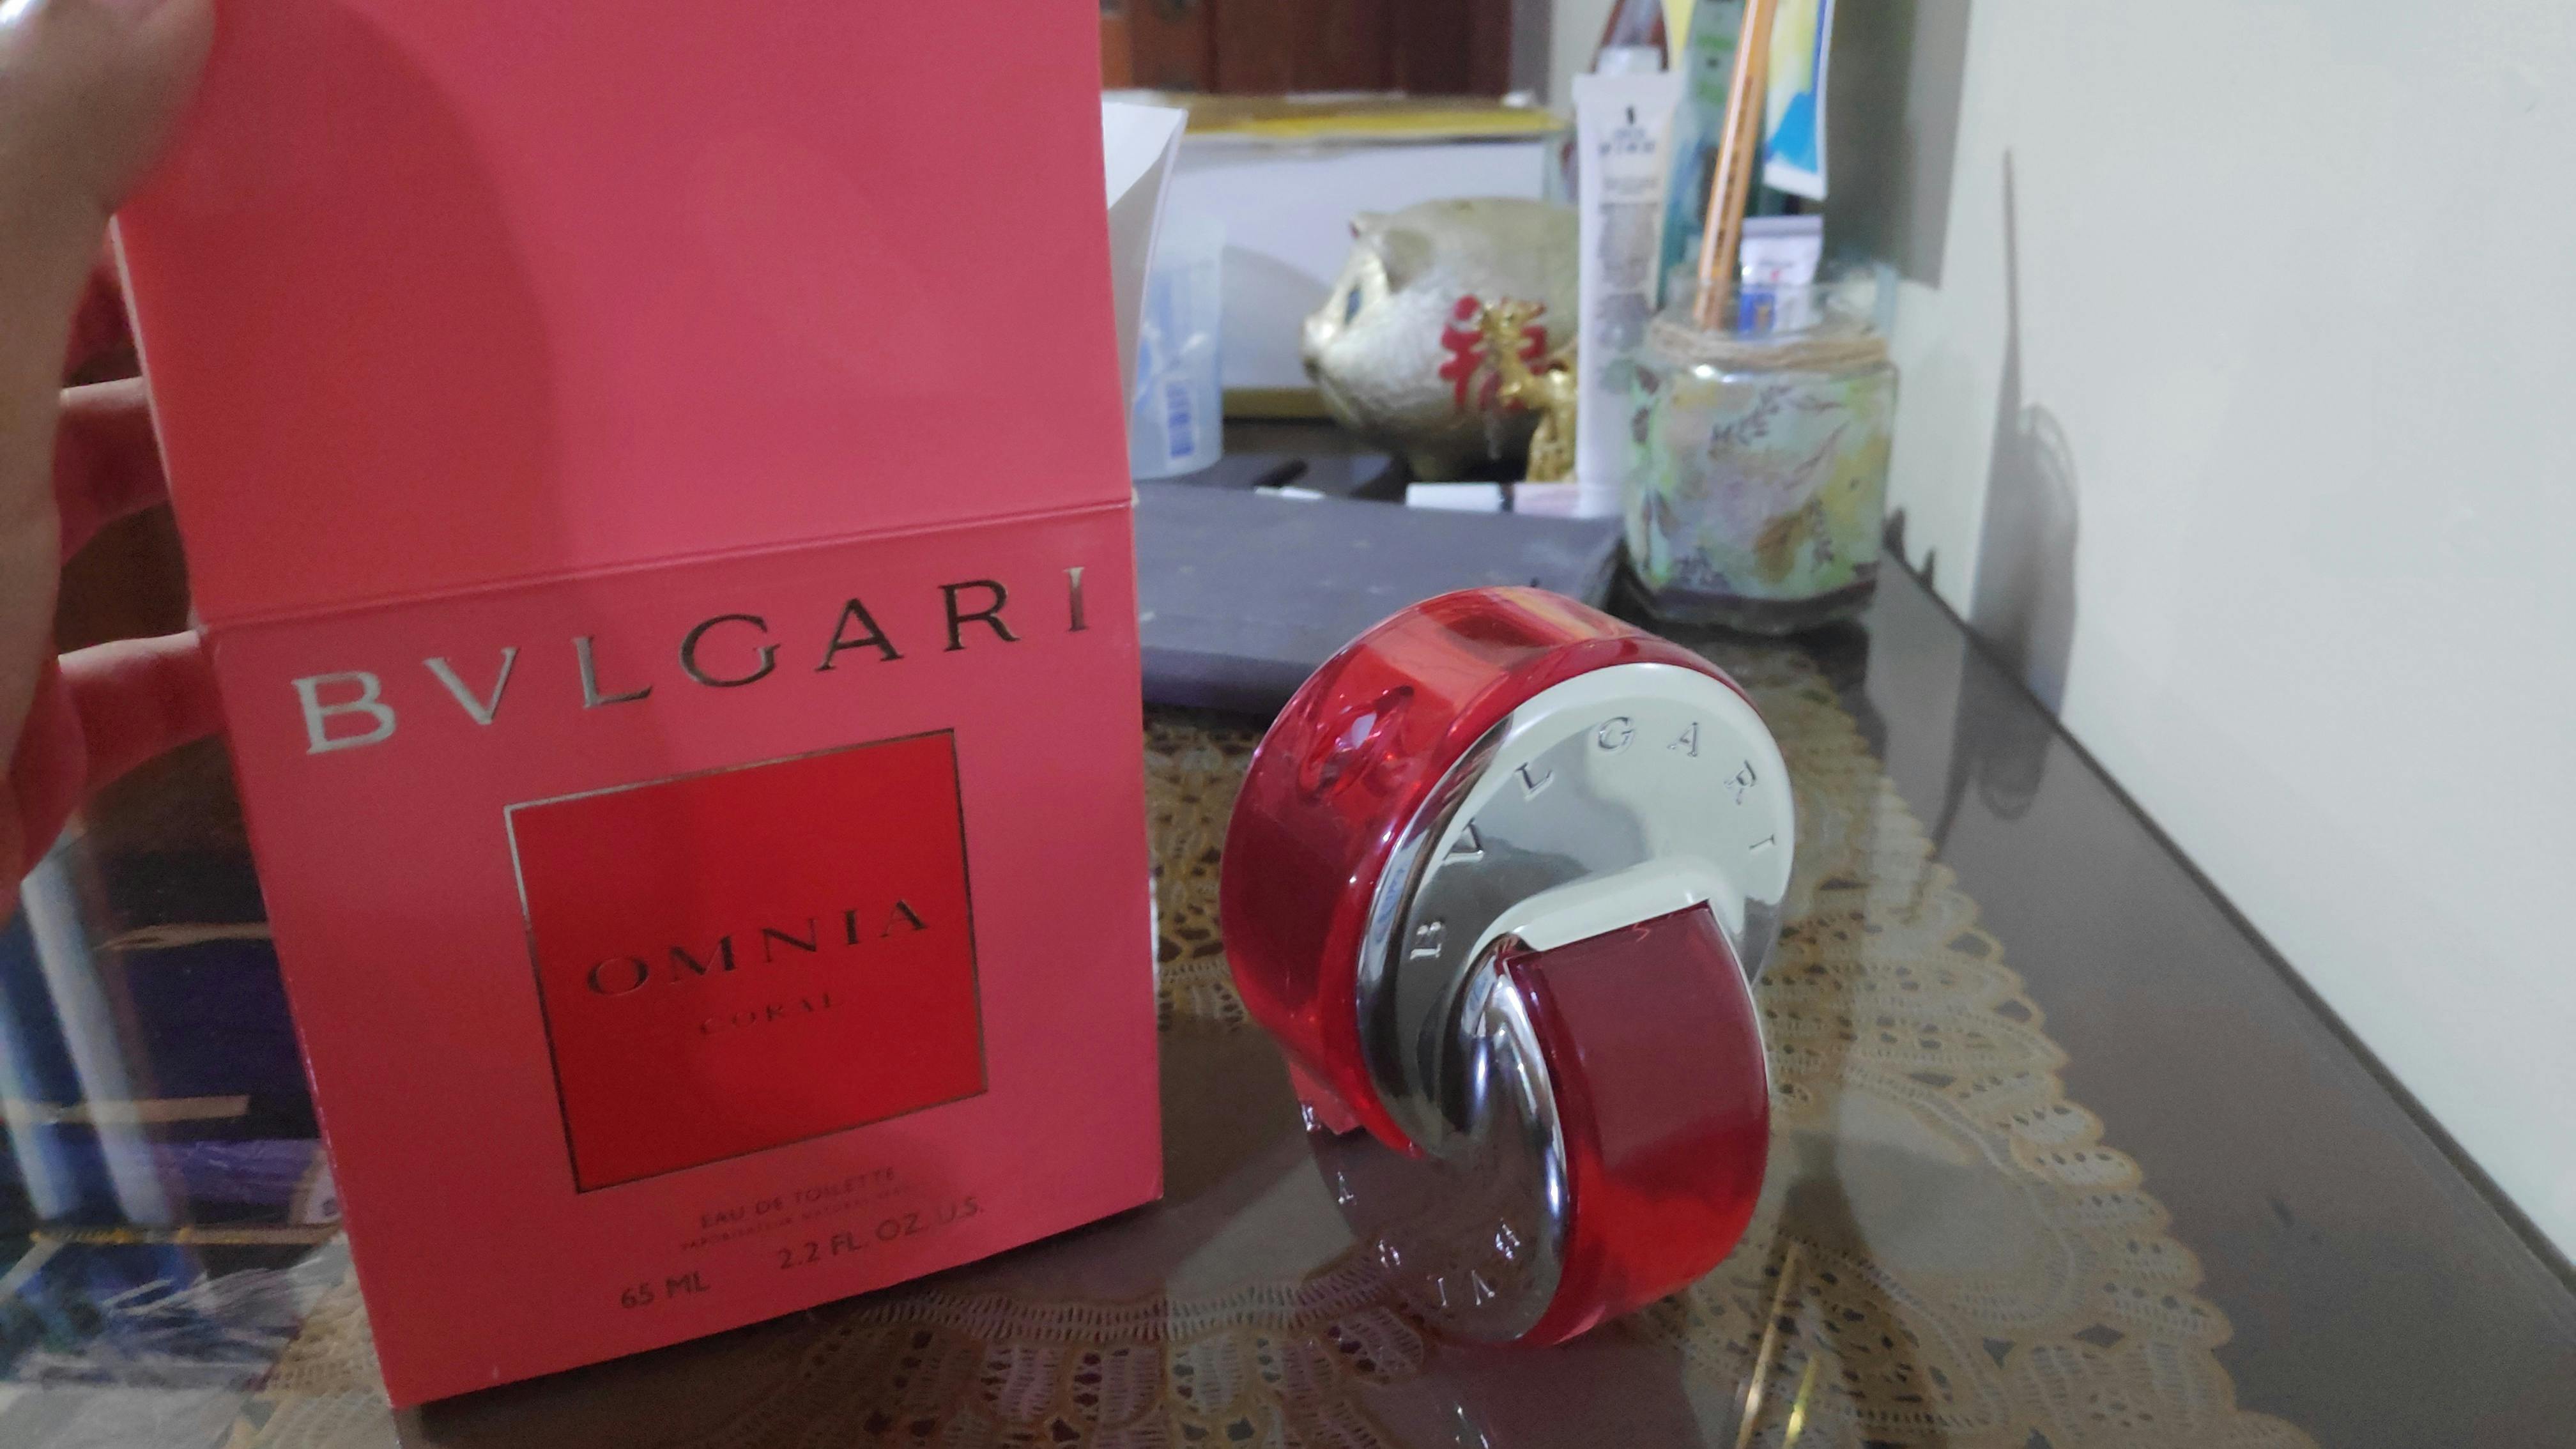 Bvlgari Omnia Coral 65ml | Branded and Authentic Perfumes for Men and Women